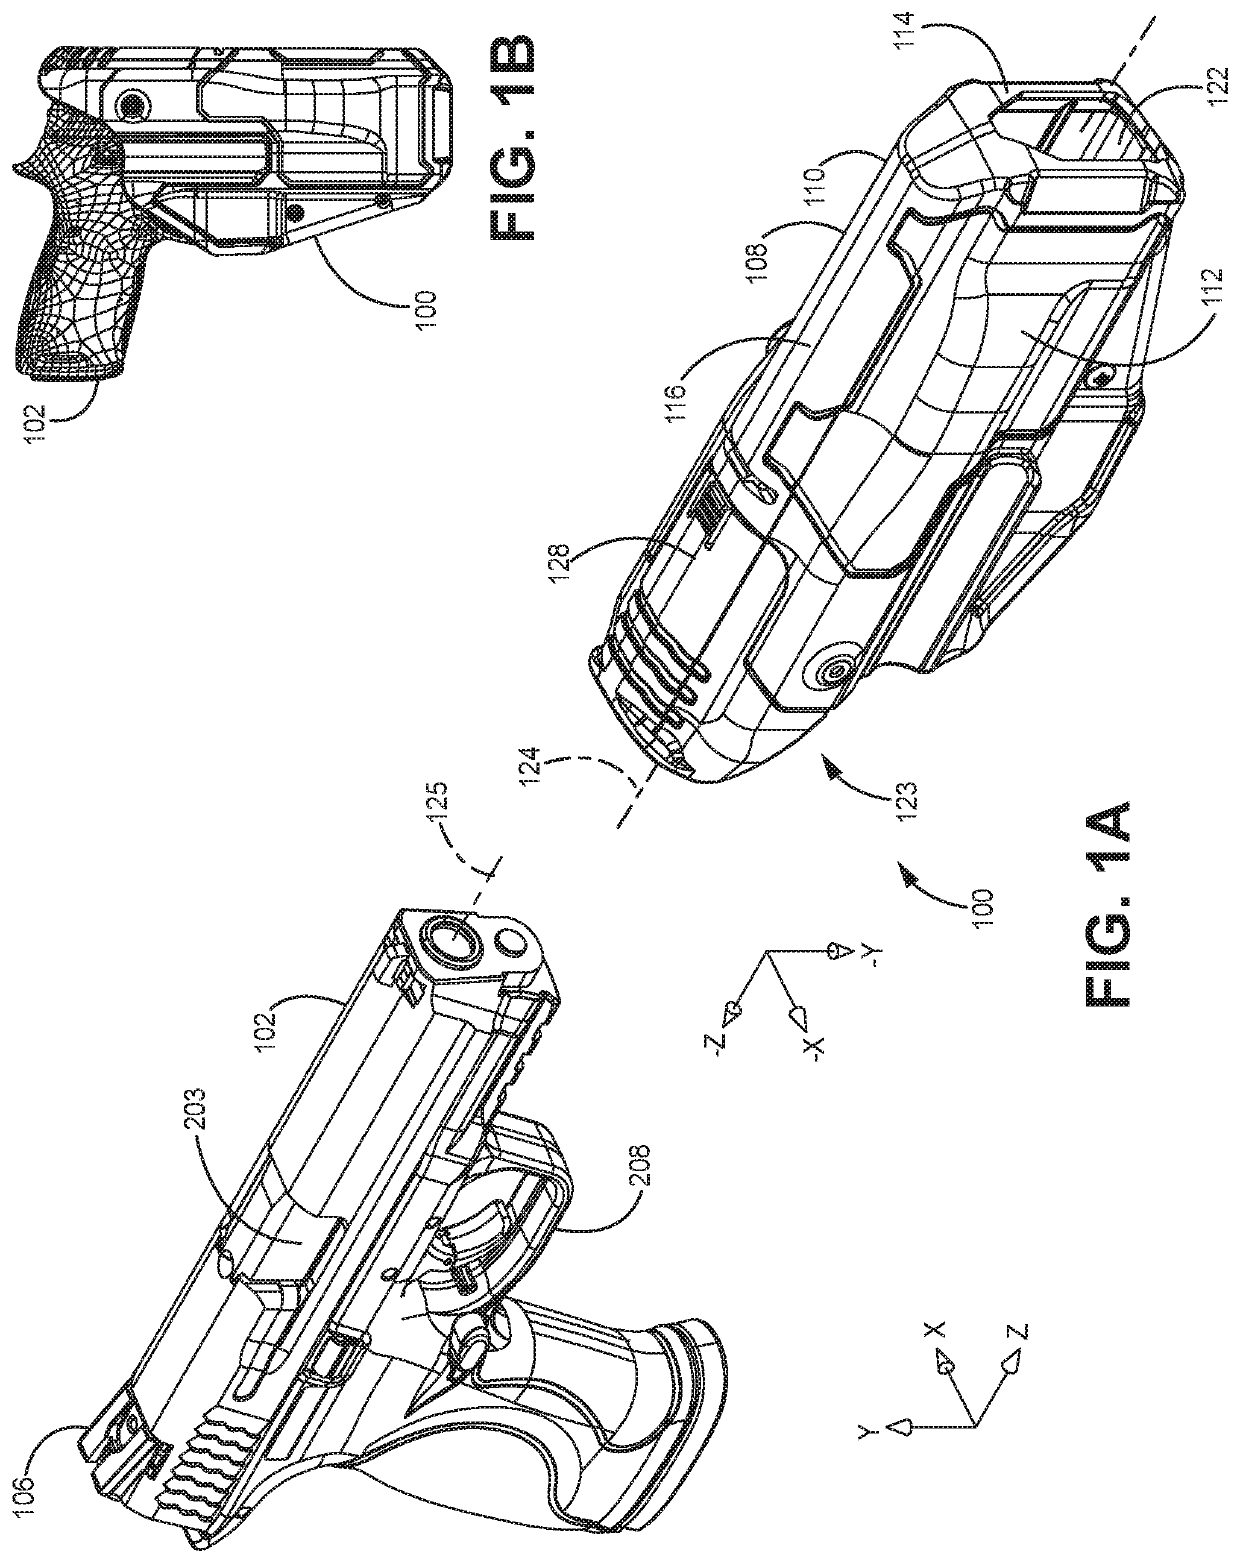 Holster system with removable sight cover